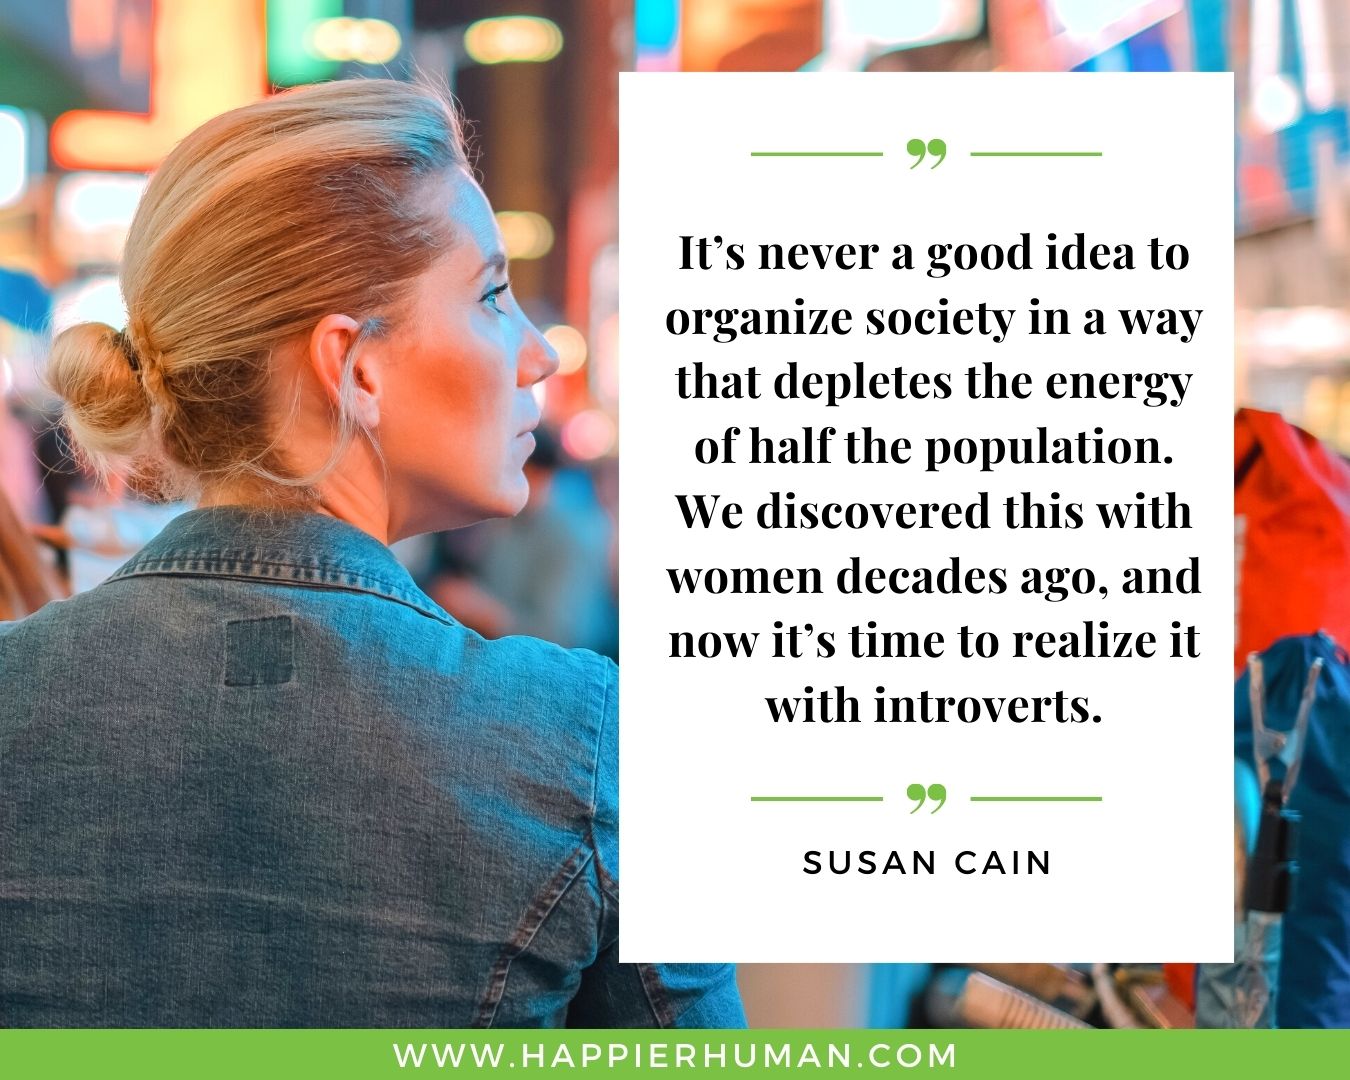 Introvert Quotes - “It’s never a good idea to organize society in a way that depletes the energy of half the population. We discovered this with women decades ago, and now it’s time to realize it with introverts.” – Susan Cain